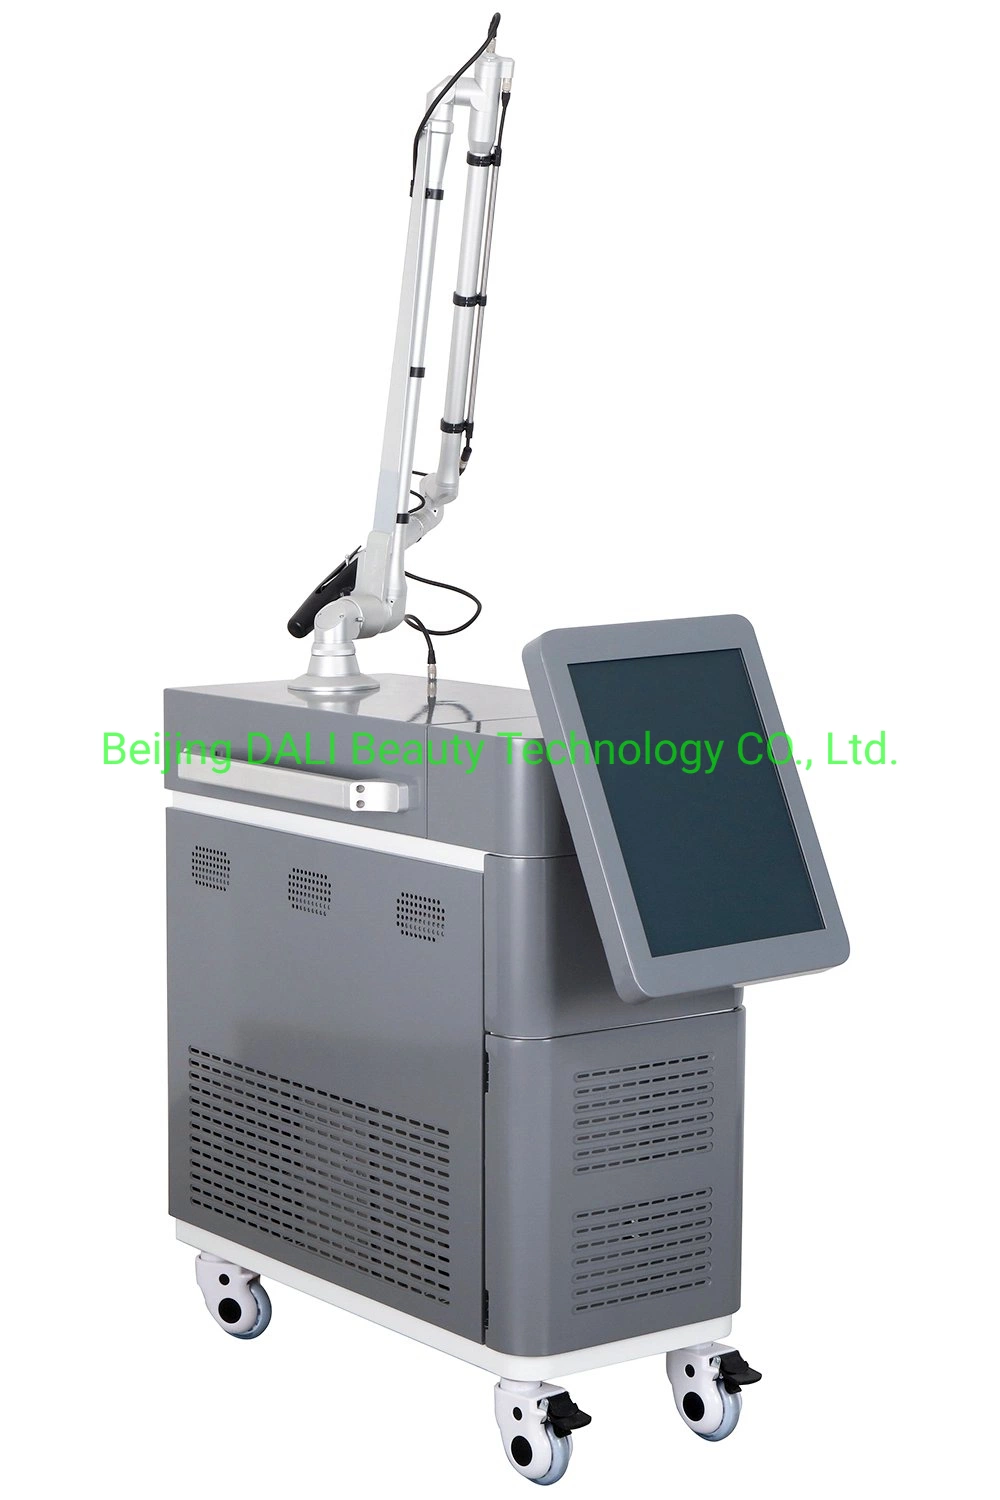 Dali Beauty Picosecond Picolaser Tattoo Removal Q Switched ND YAG Laser Spot Pigment Alex Laser Tattoo Remove Carbon Peeling Black Doll Skin Whitening